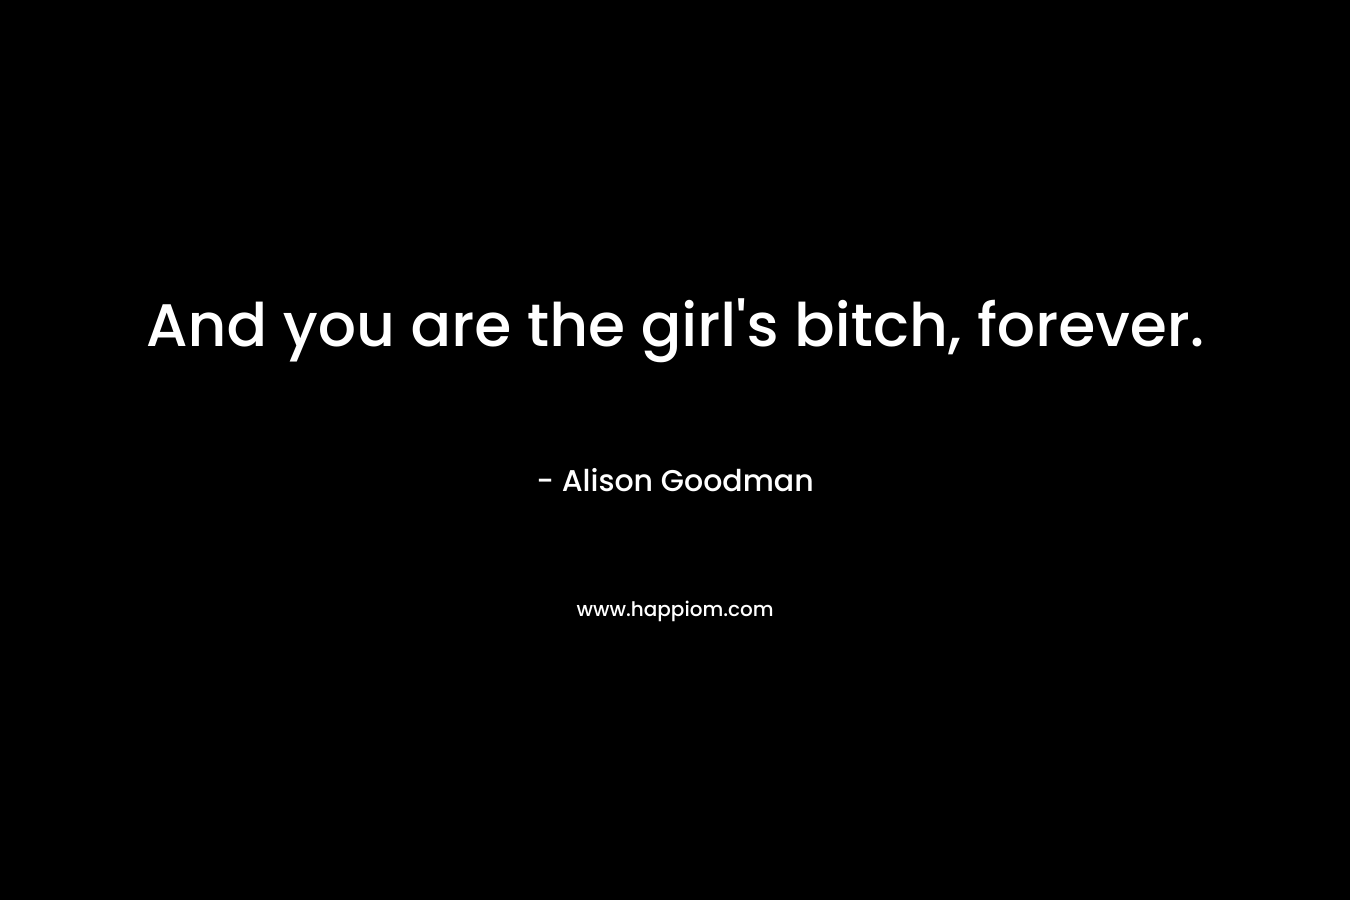 And you are the girl's bitch, forever.